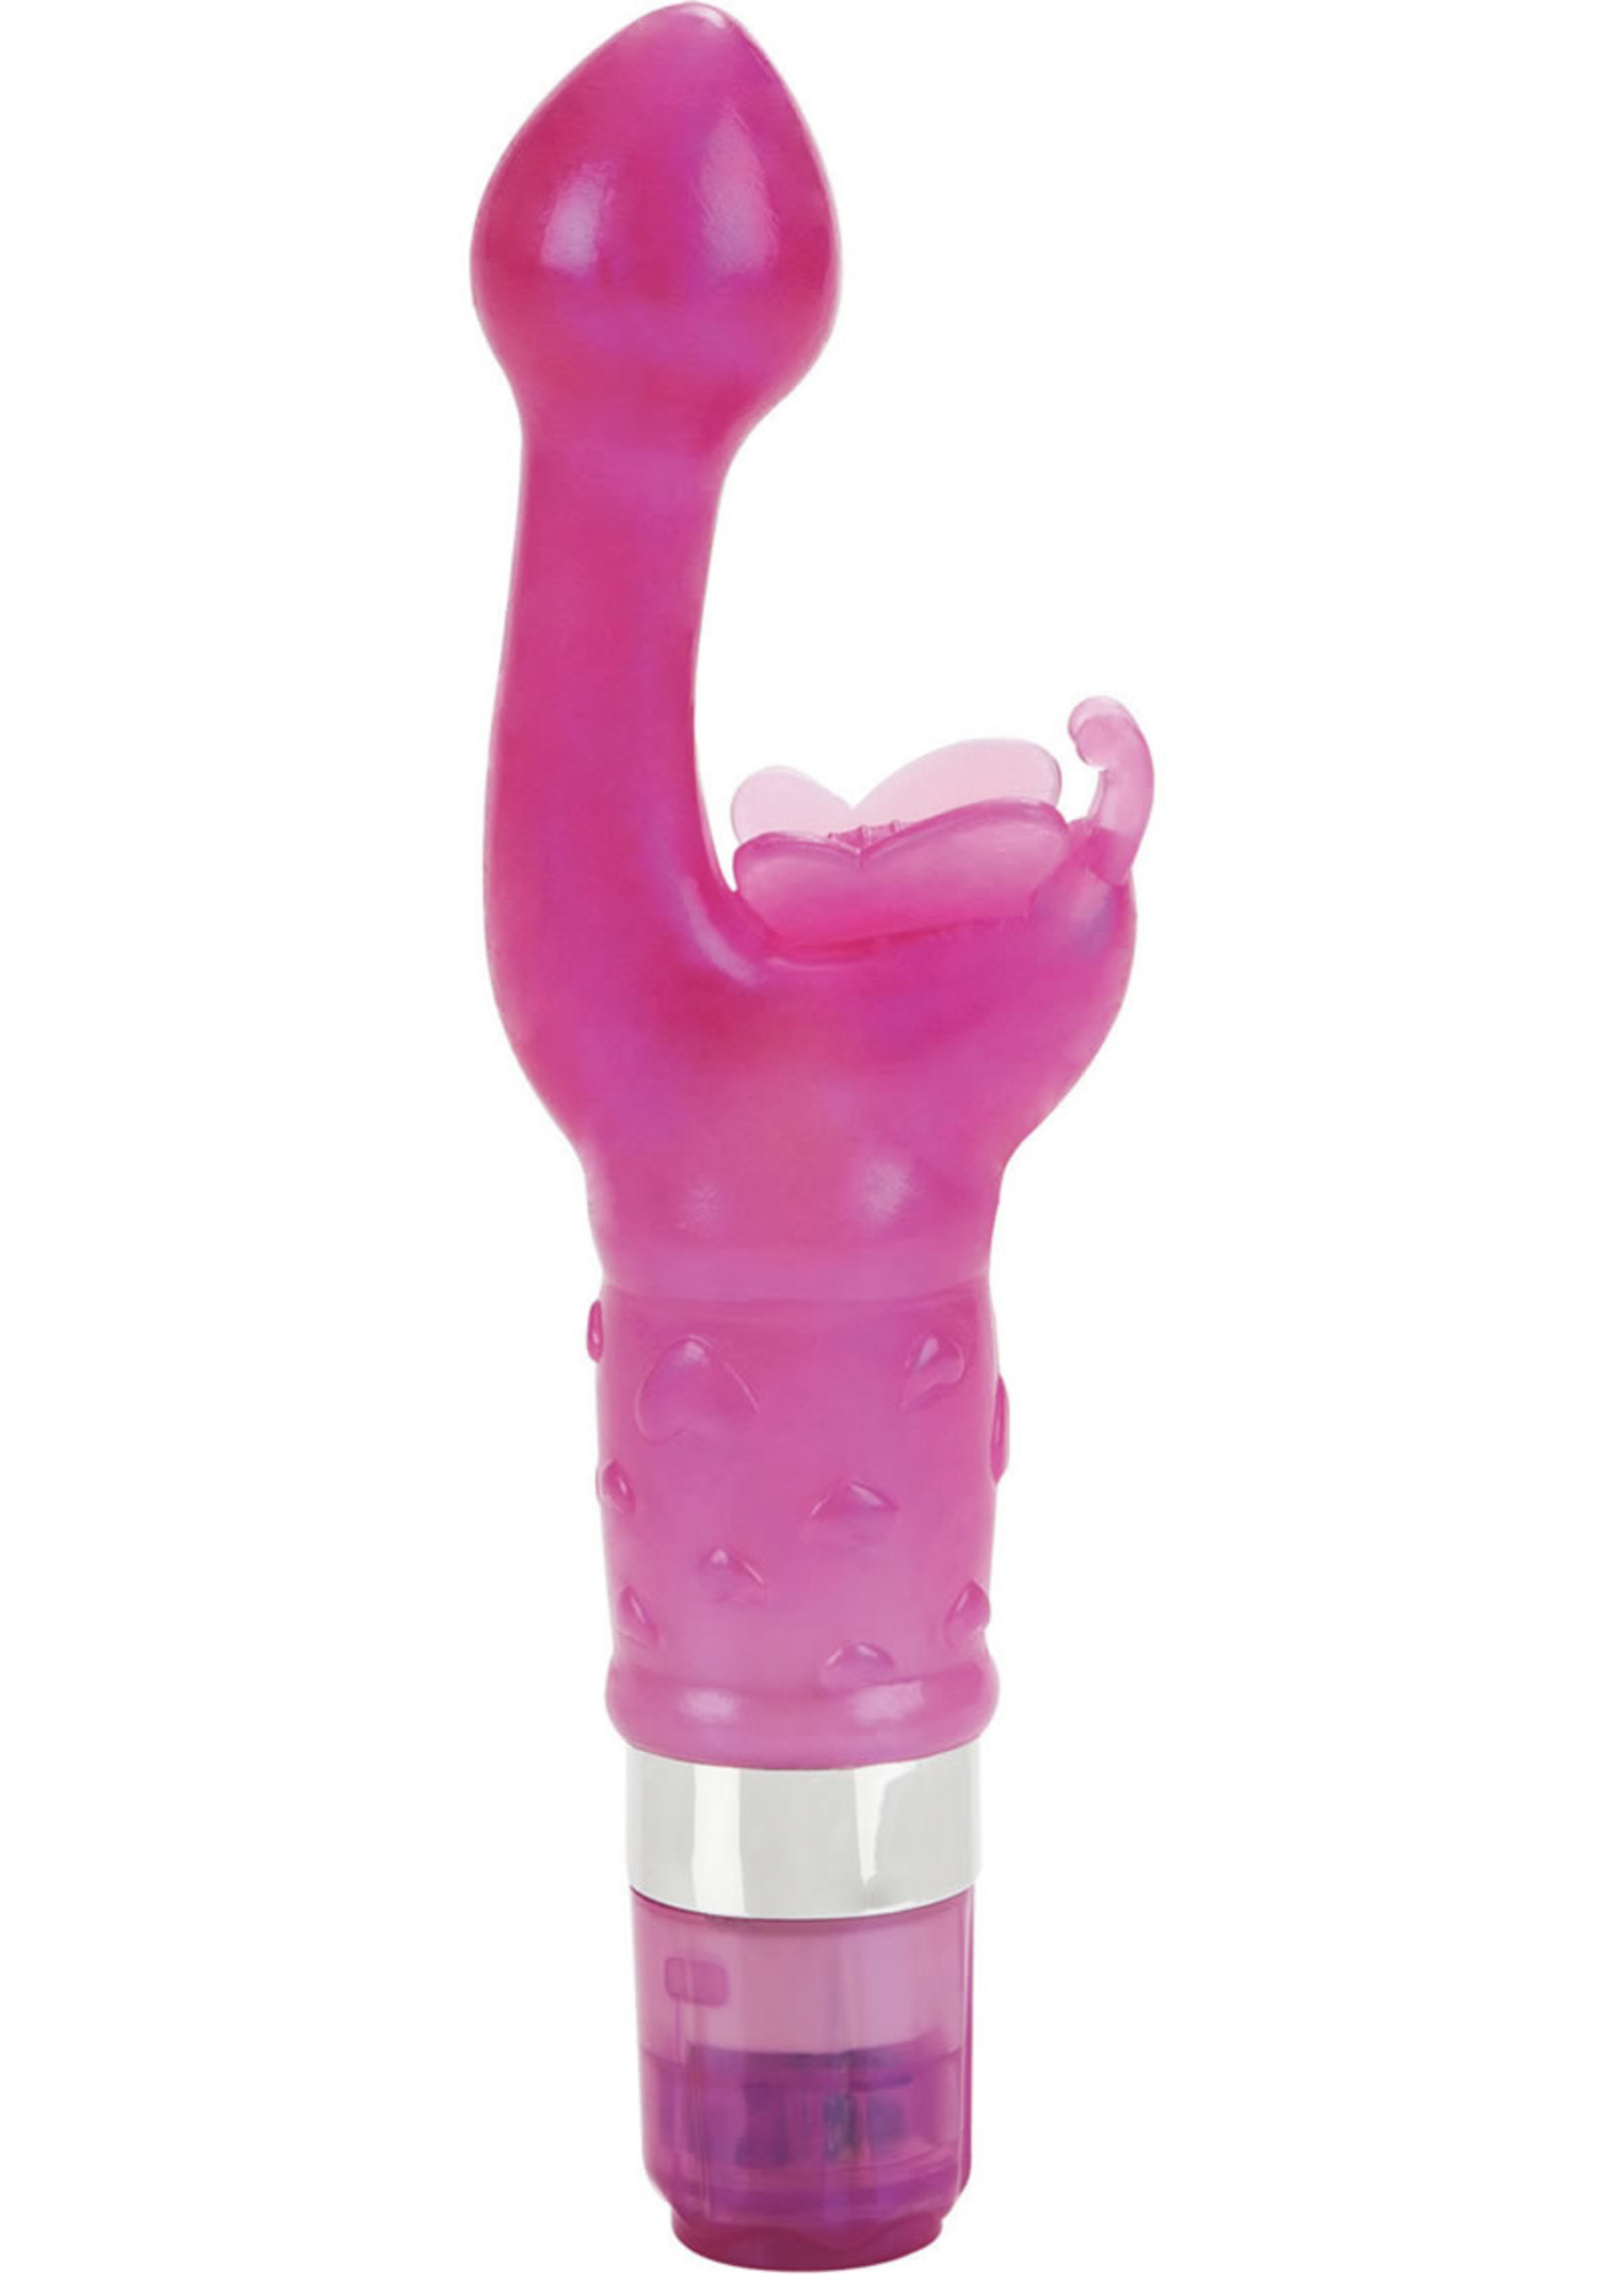 Butterfly Kiss Platinum Edition Vibrator in Pink